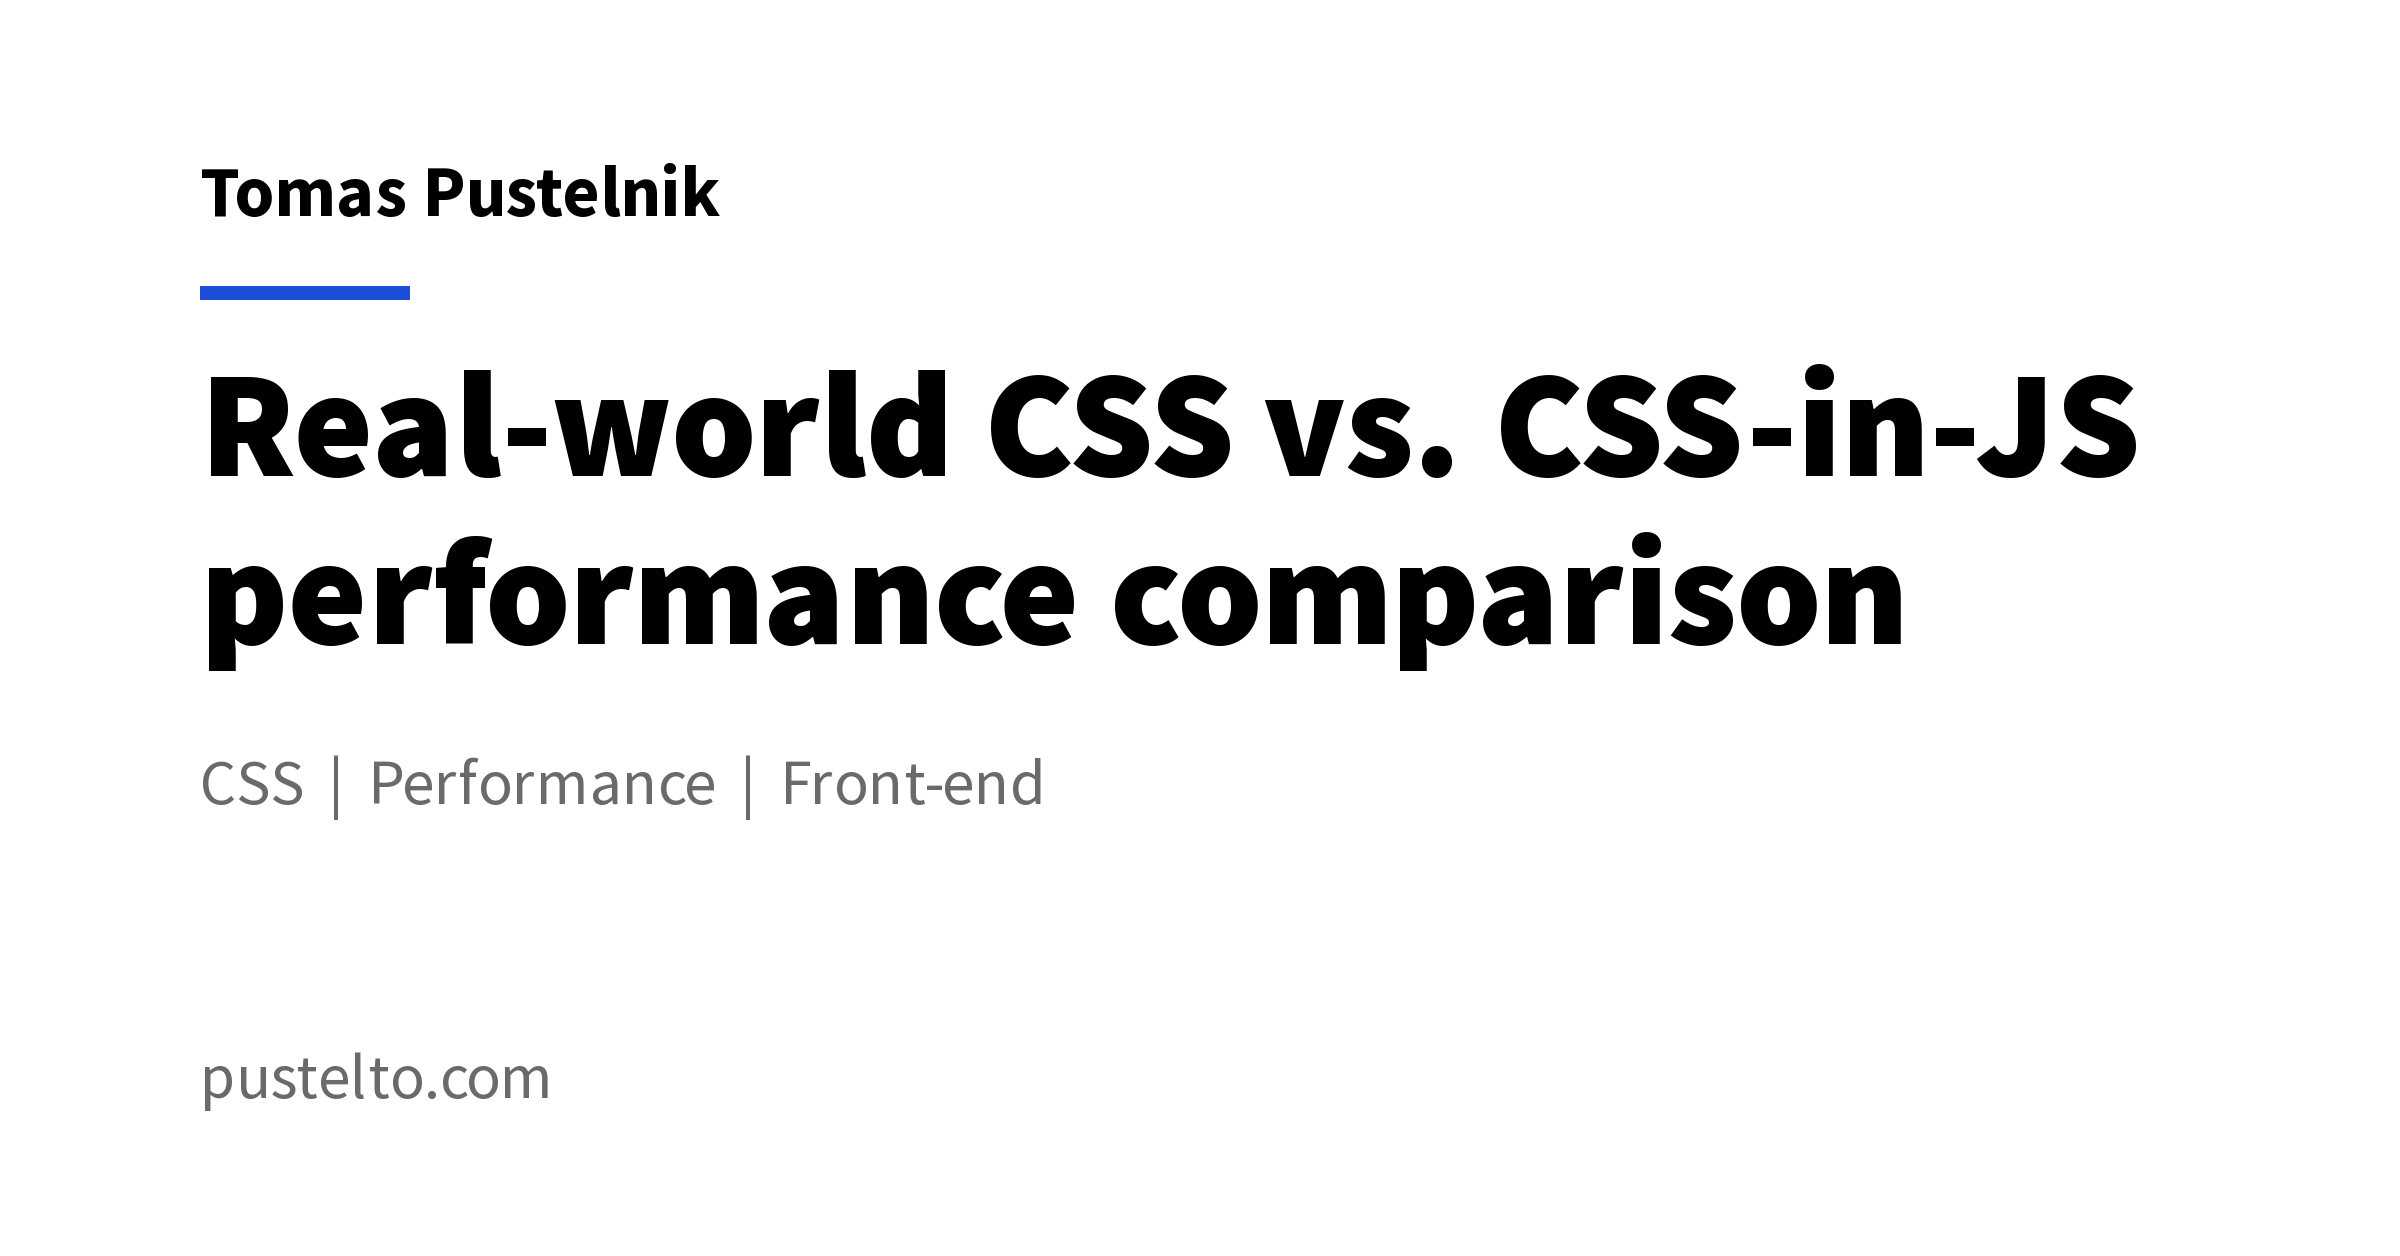 Real-world CSS vs. CSS-in-JS performance comparison - Tomas Pustelnik’s personal website